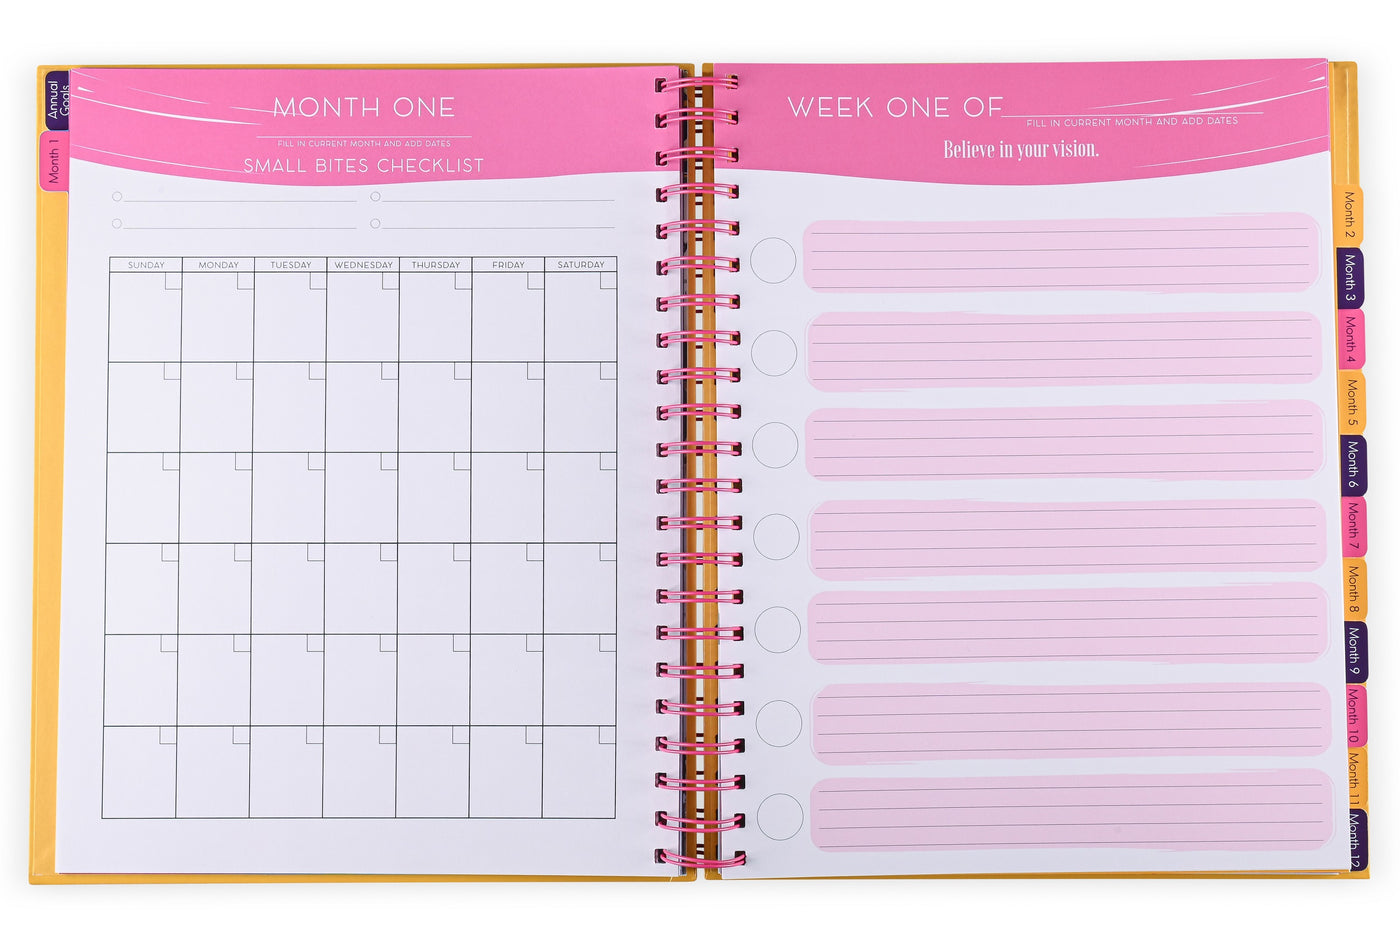 TODAY IS A GREAT DAY FOR EATING PINK ELEPHANTS - 4-in-1 Vision Board, Journal, Goal Planner and UNDATED Calendar